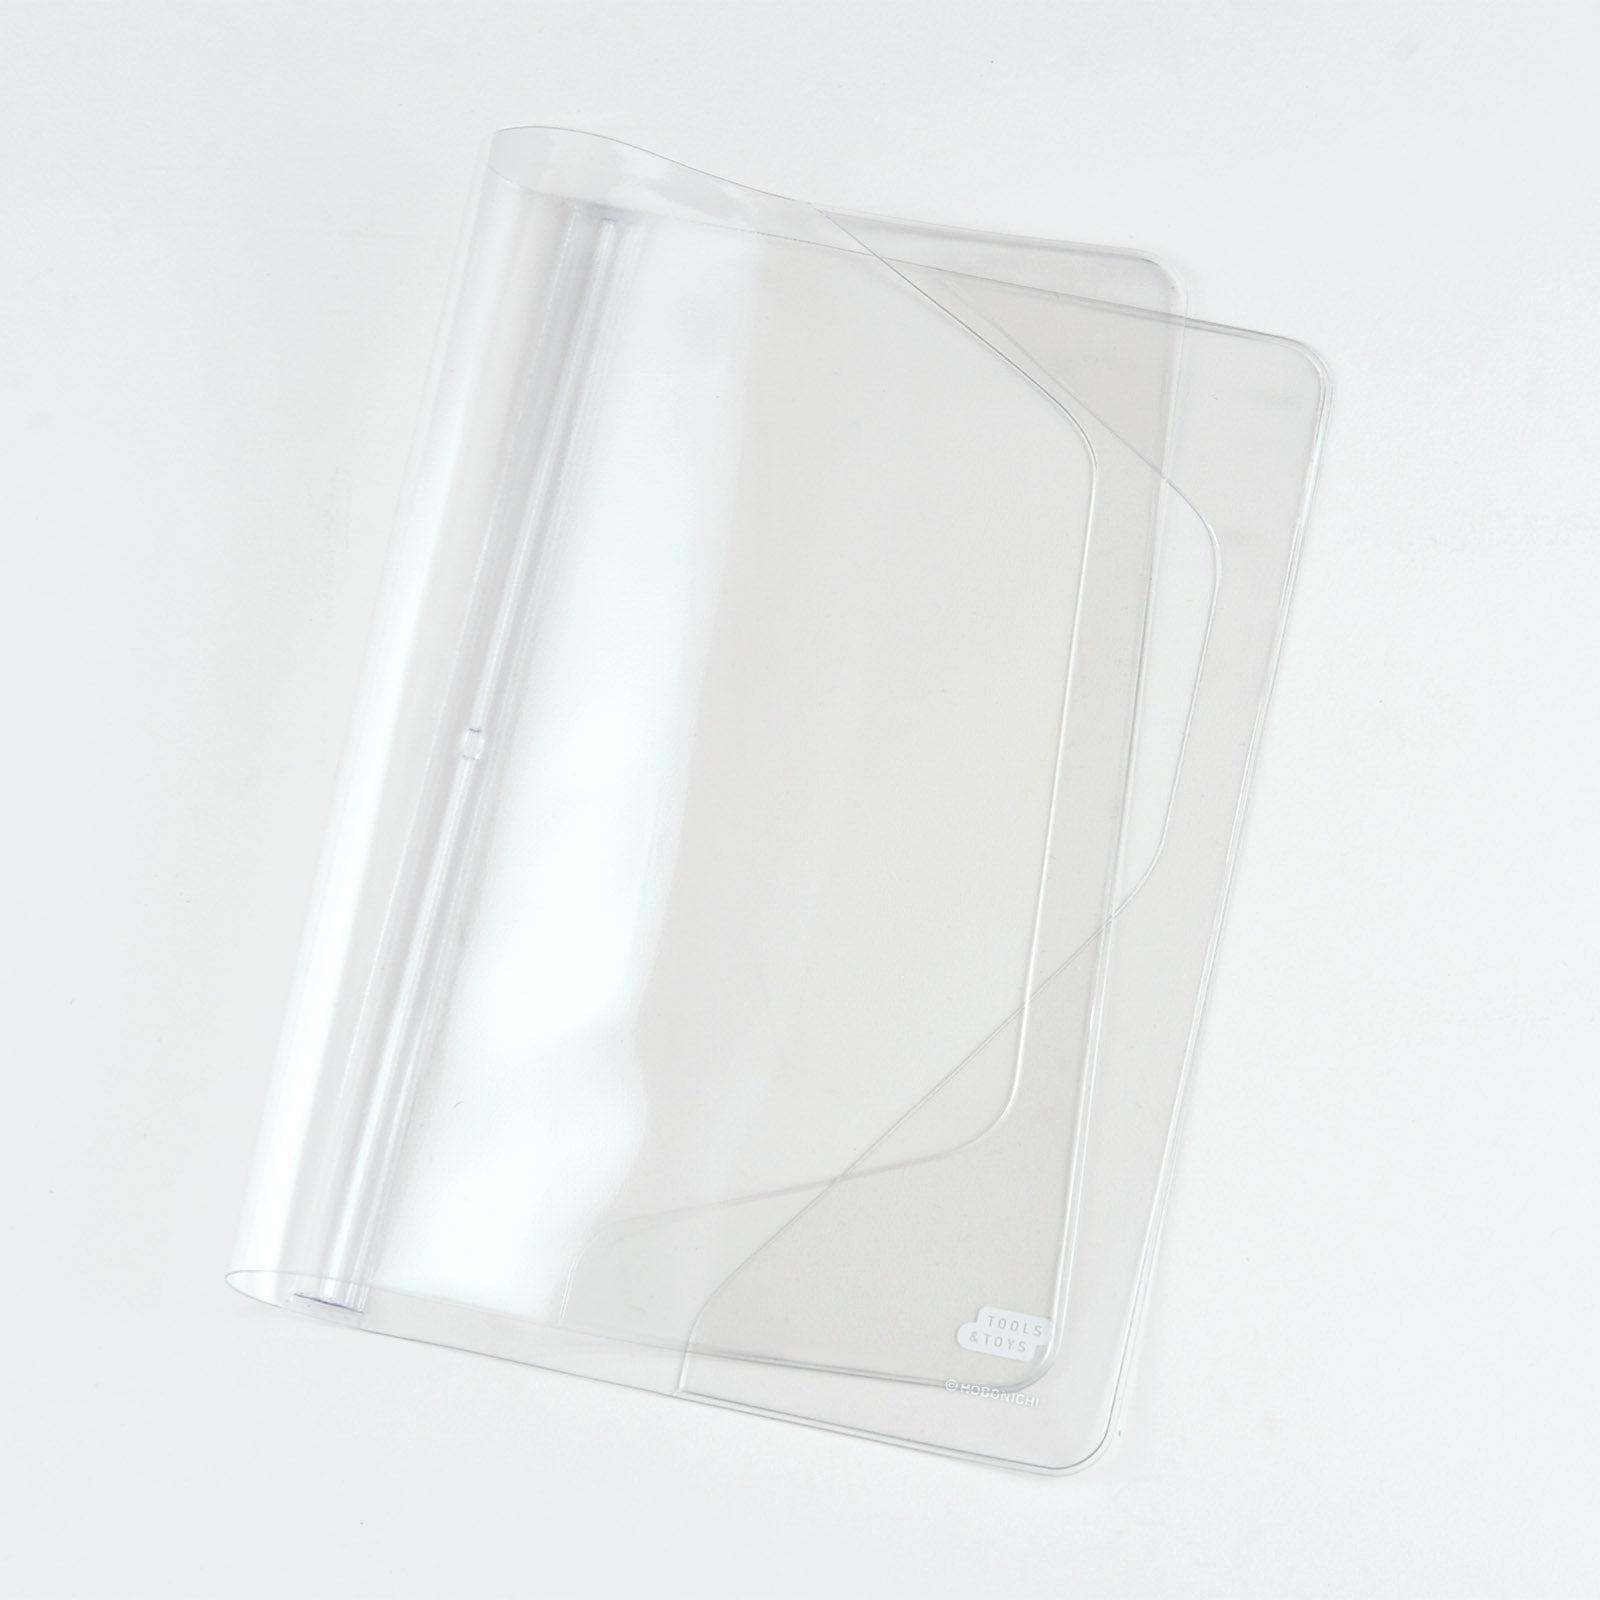 Hobonichi Clear Cover on Cover / A5 Cousin Cover on cover is a protective cover that can be used on top of your Hobonichi Cousin cloth covers to protect them from wear and tear. This product can not be used on top of the book only. You can also store illustrations under your cover on cover to boost your Hobonichi covers design.